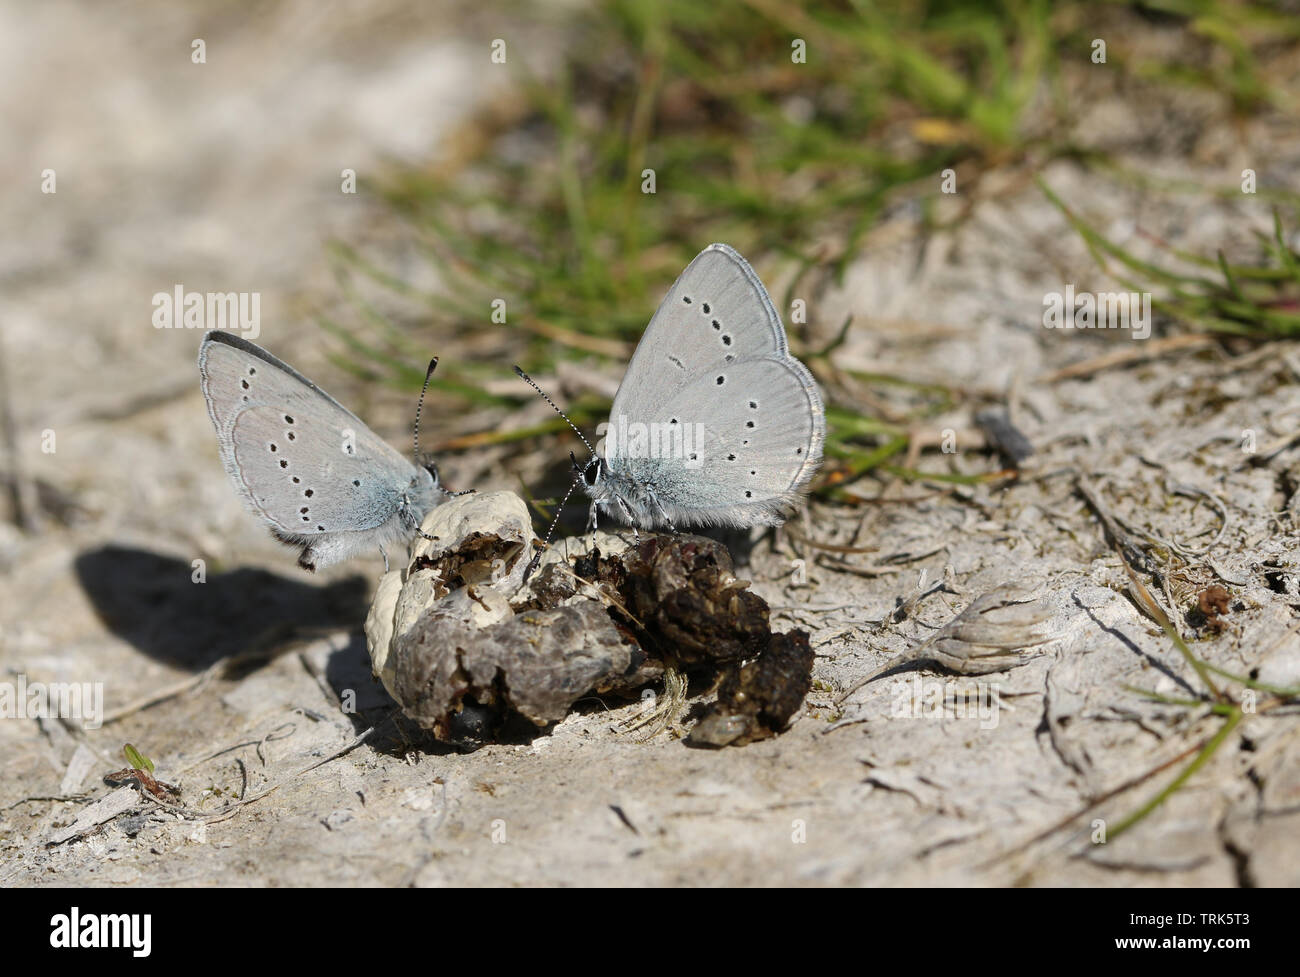 Two rare Small Blue Butterfly, Cupido minimus, feeding on animal faeces on the ground. Stock Photo